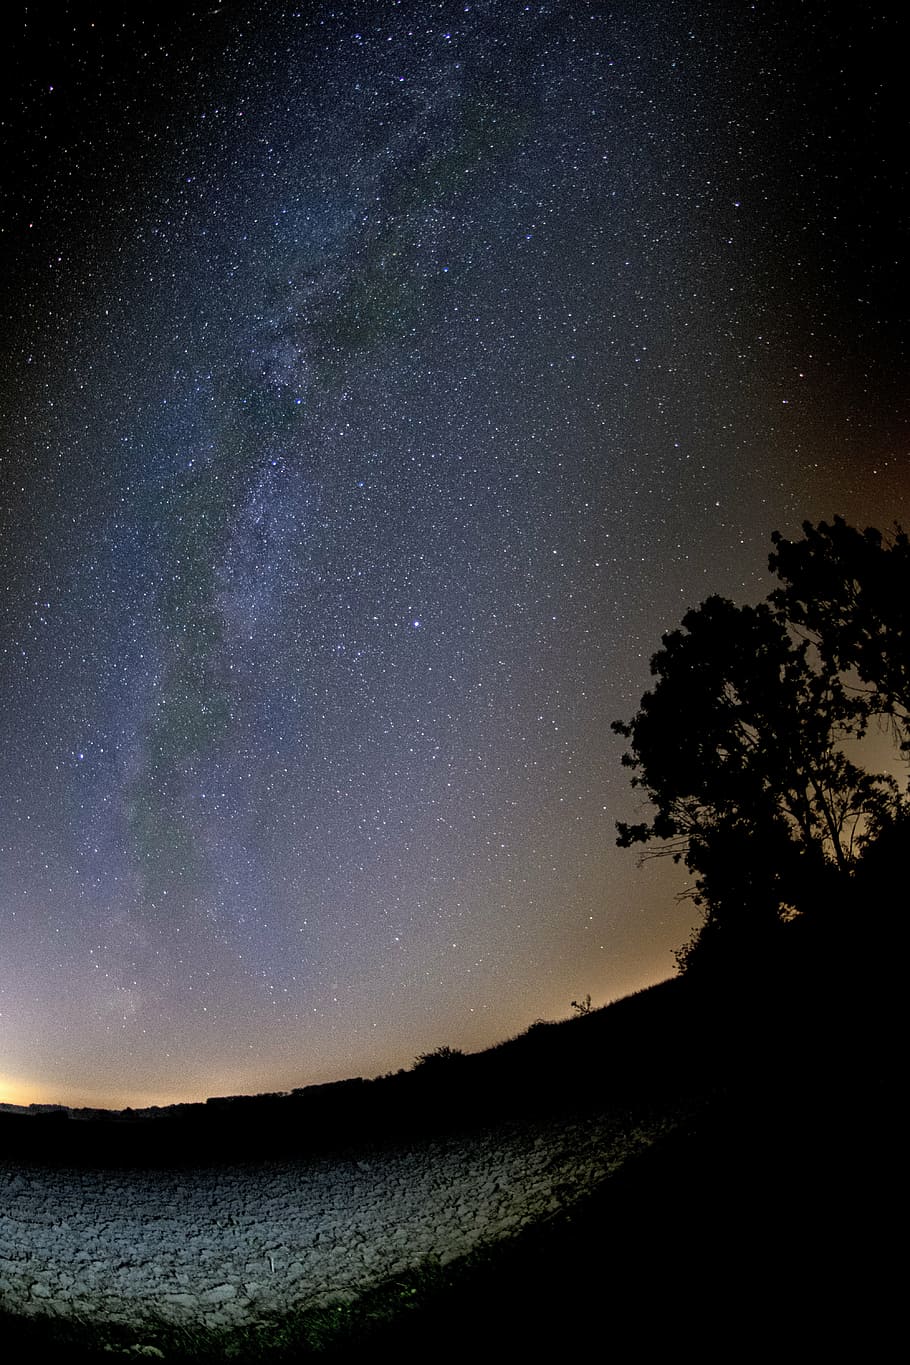 milky way, galaxy, star, space, nature, summer, light, astronomy